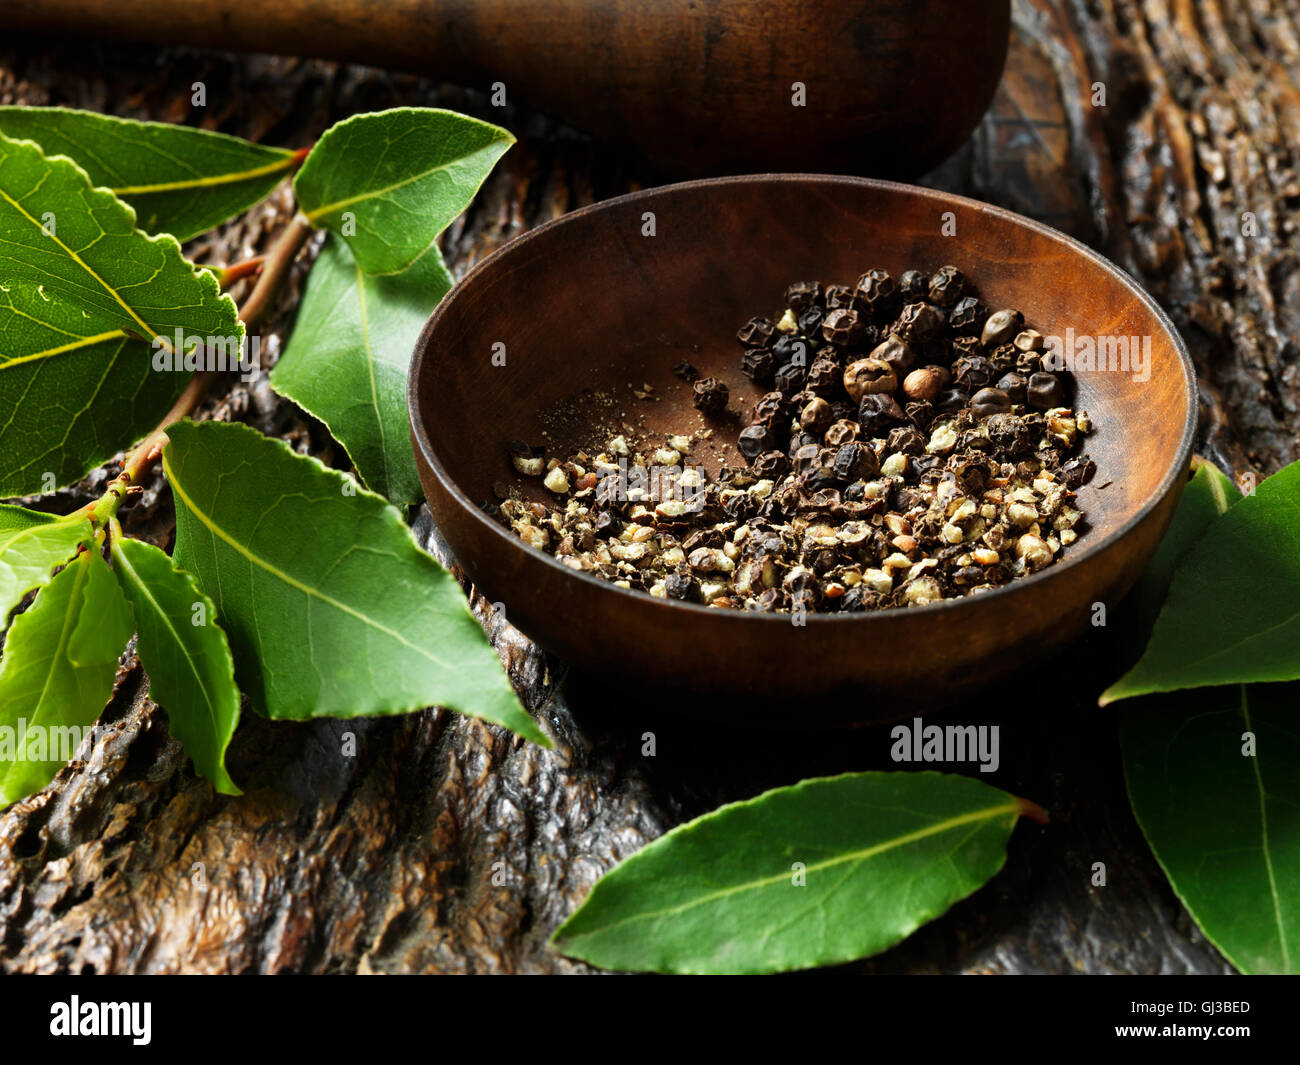 Crushed peppercorns in bowl, bay leaves on rustic wooden surface Stock Photo